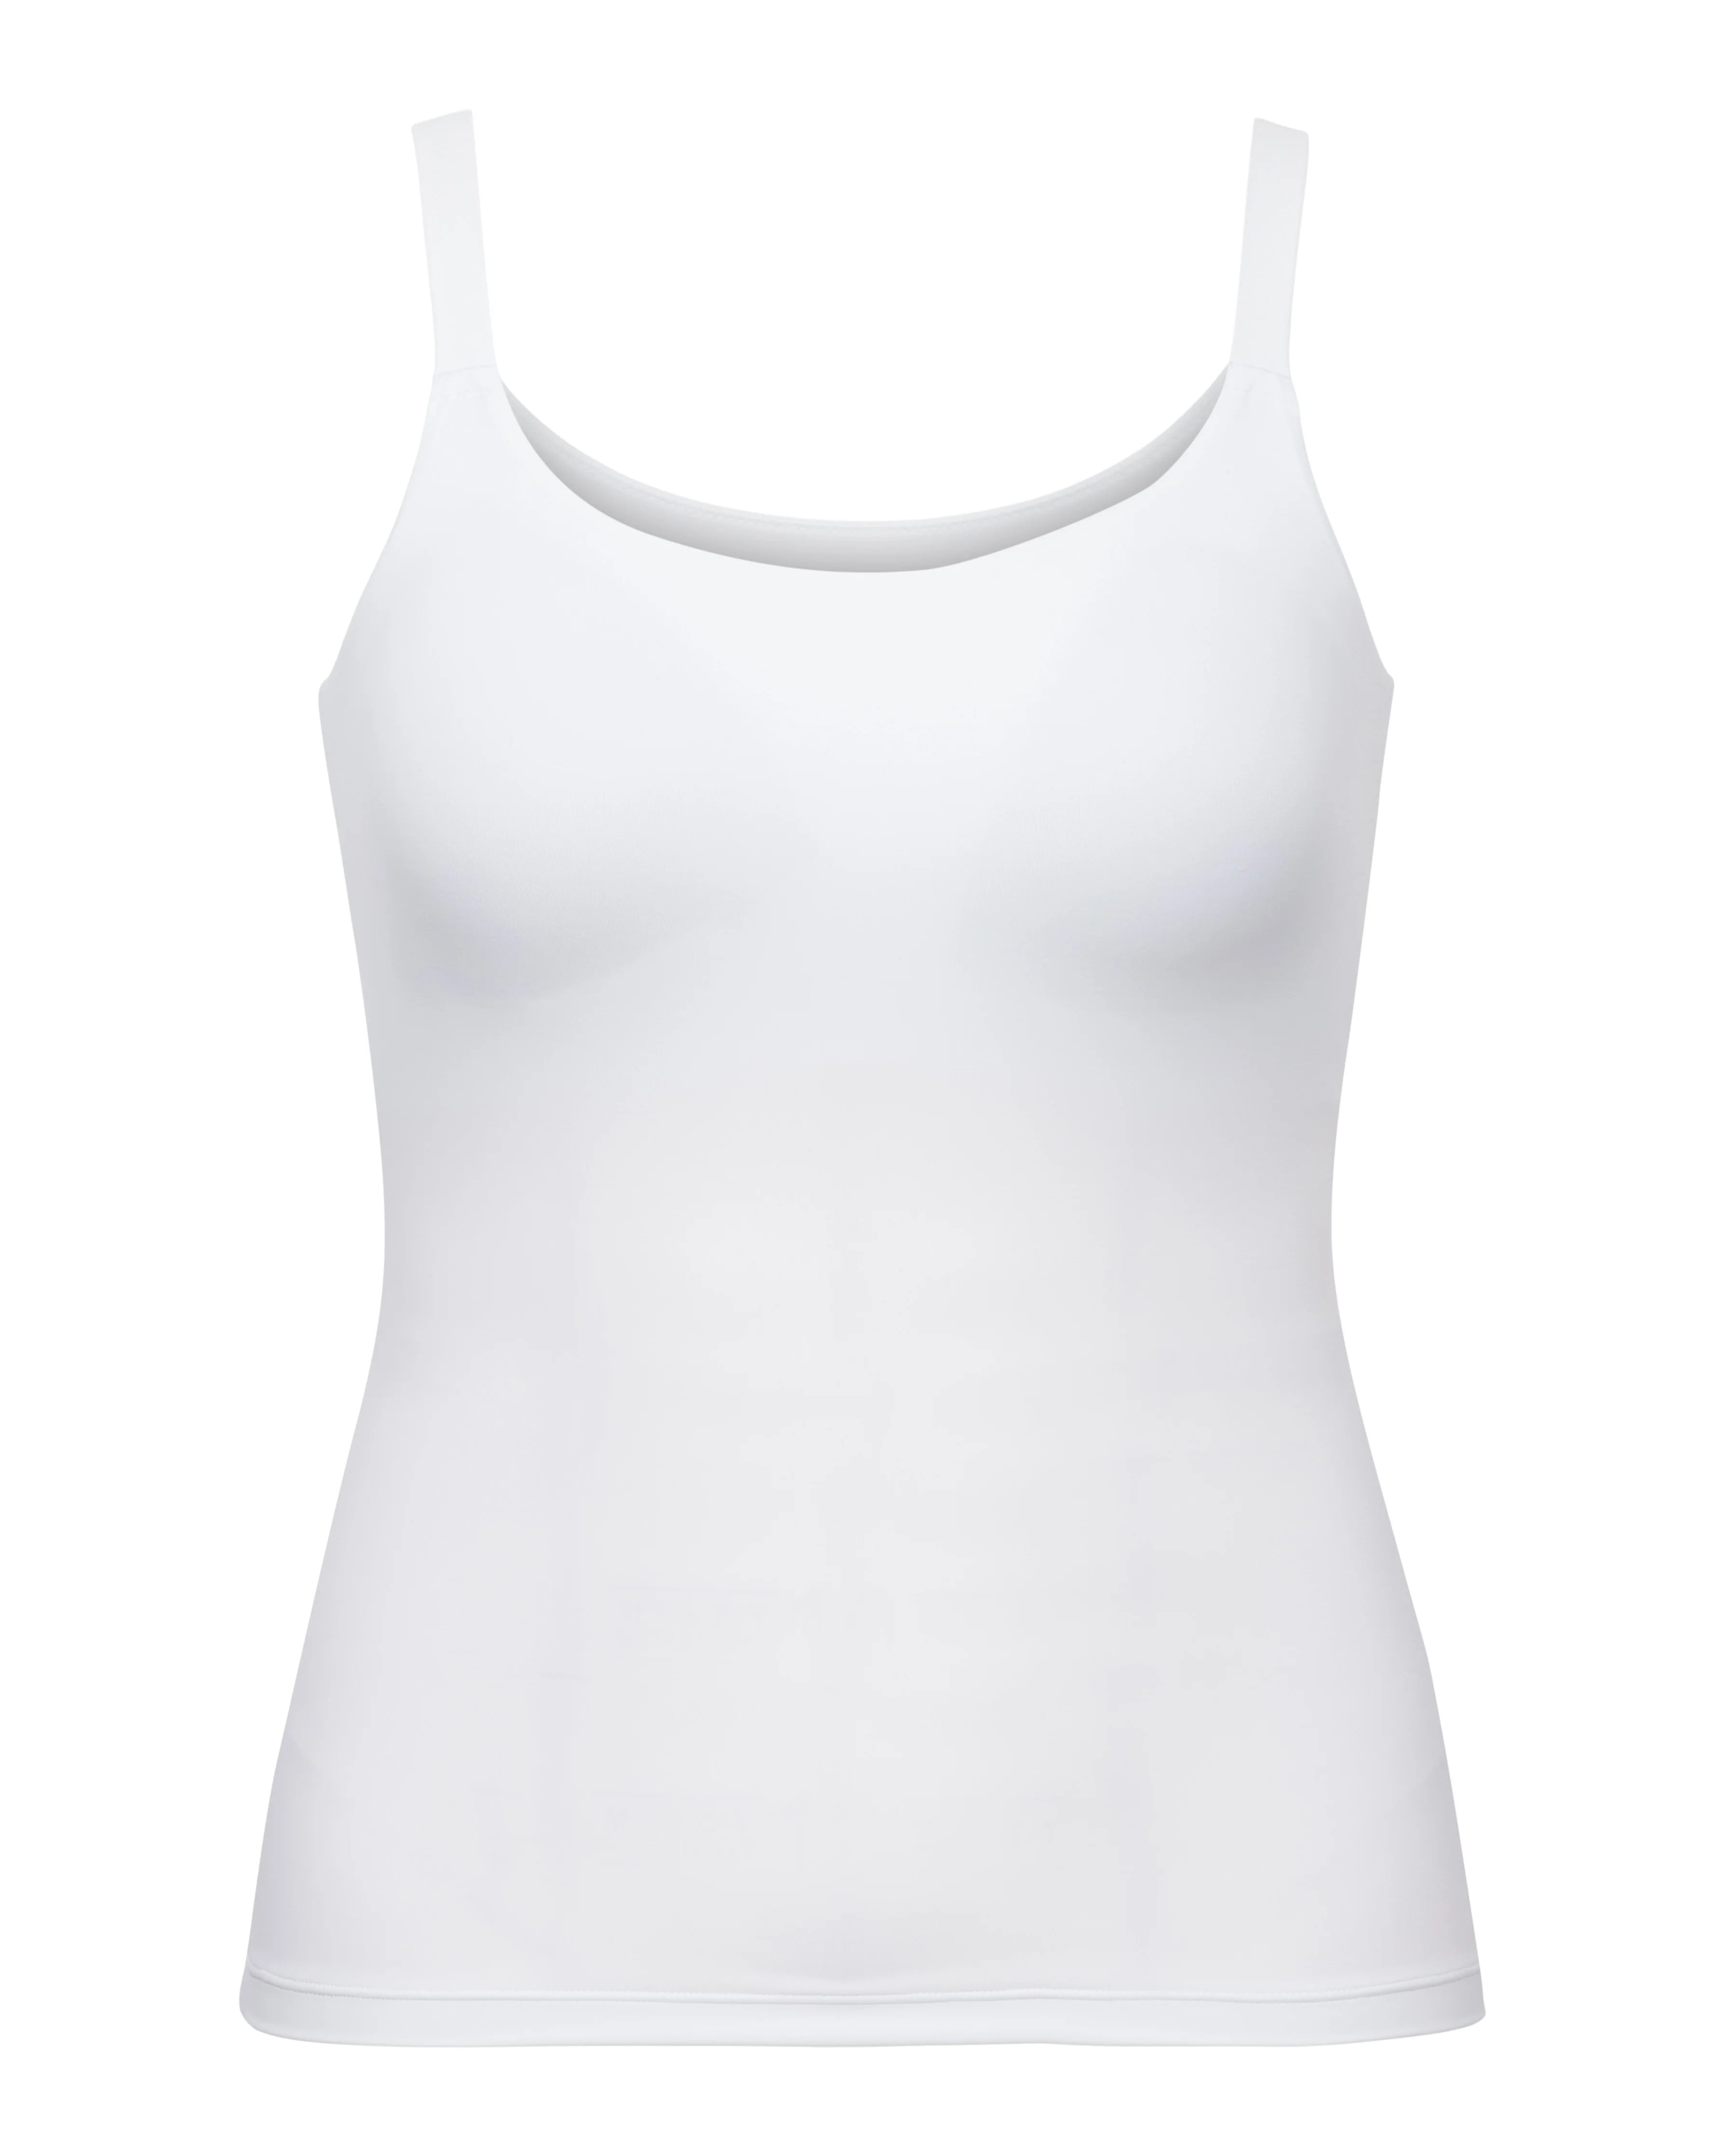 Bra-llelujah!® One-and-Done Cami | Spanx